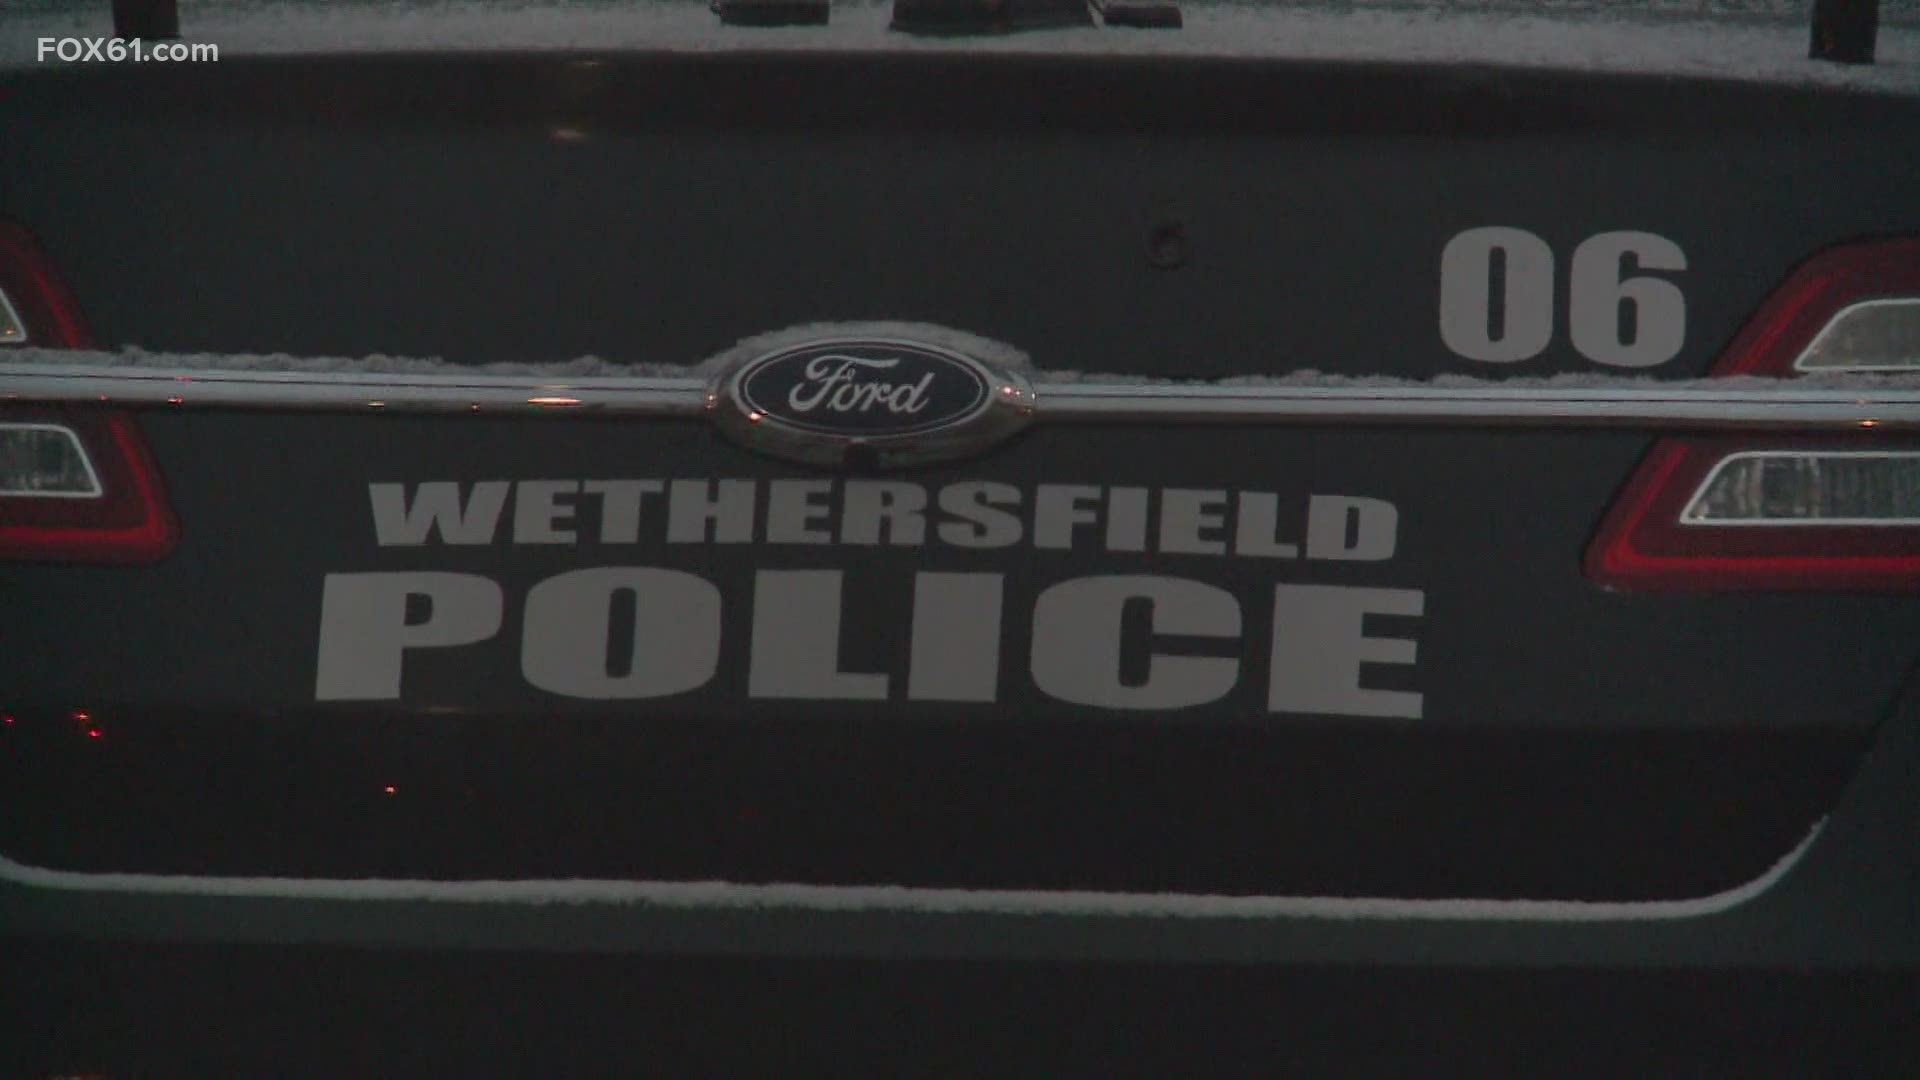 Wethersfield Police Chief James Cetran was just served a notice from town manager Gary Evans that he intends to fire Cetran.